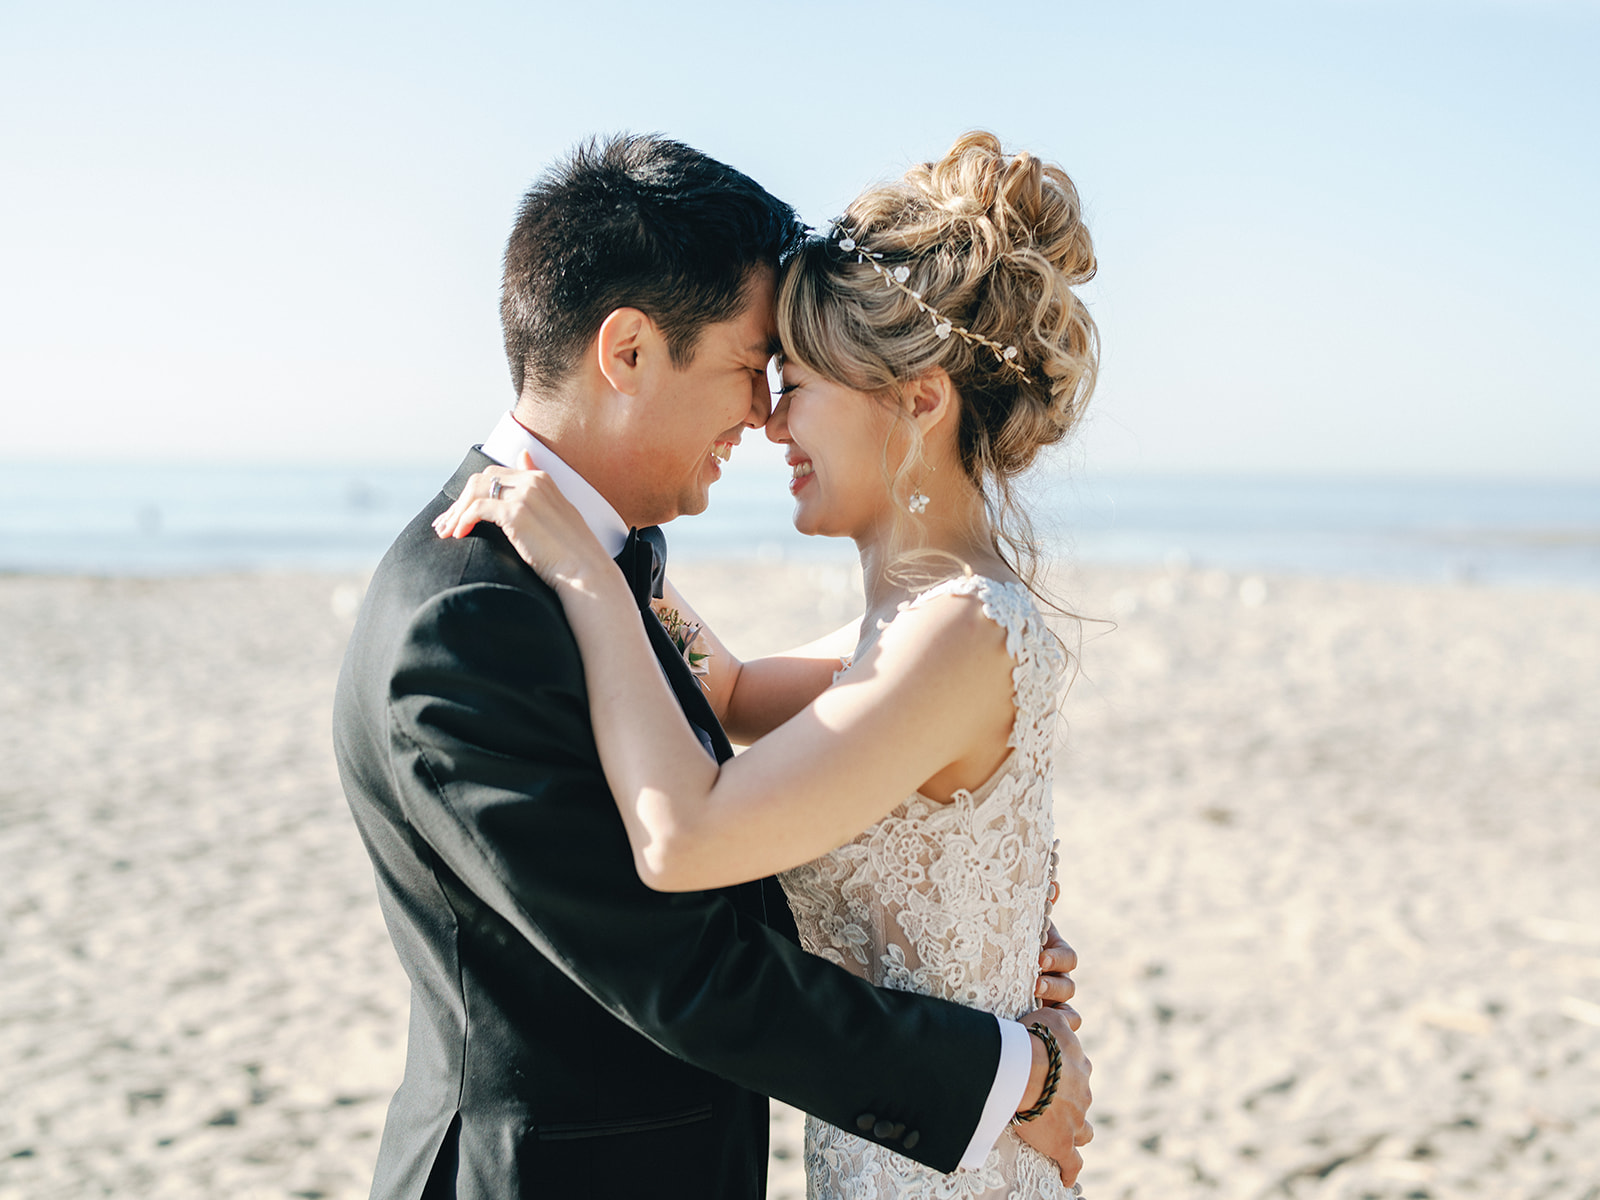 Intimate Wedding and Reception at Inn of the Seventh Ray. Wedding Portrait session at Topanga State Beach.